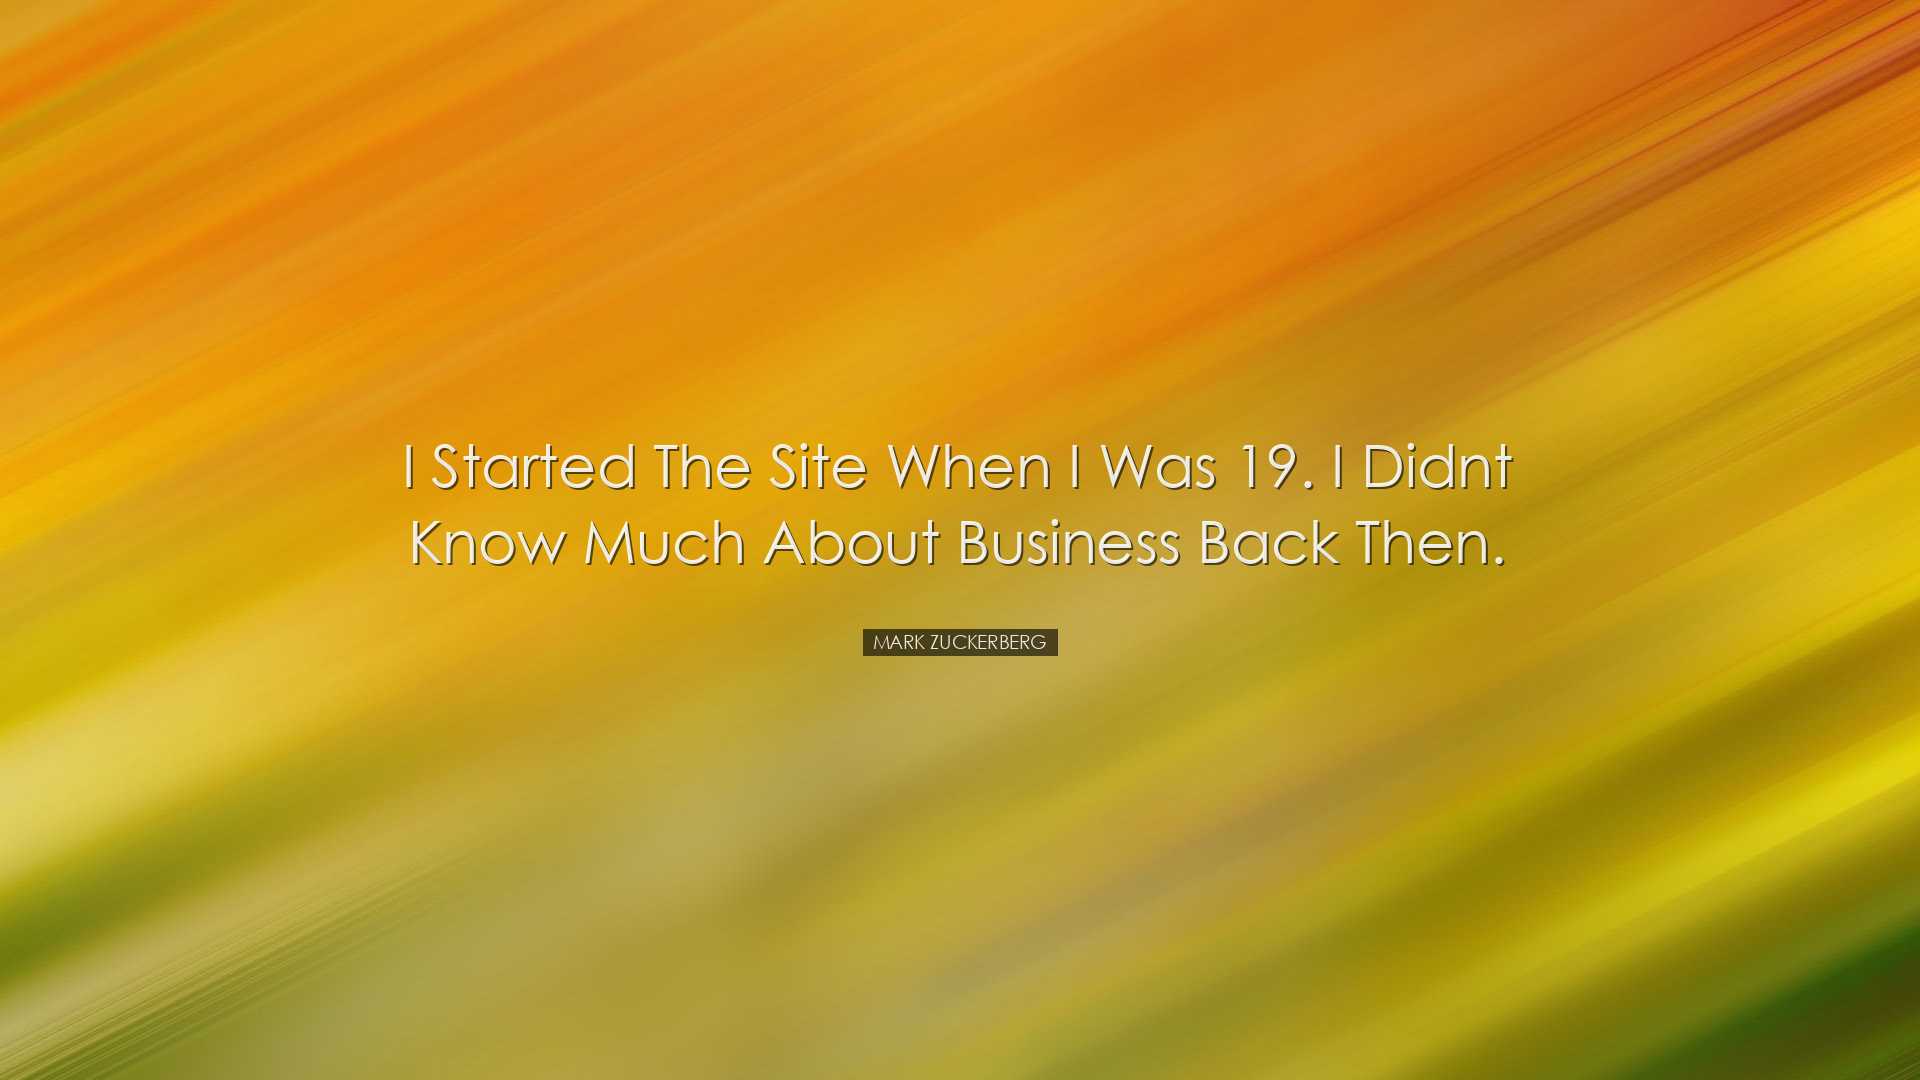 I started the site when I was 19. I didnt know much about business